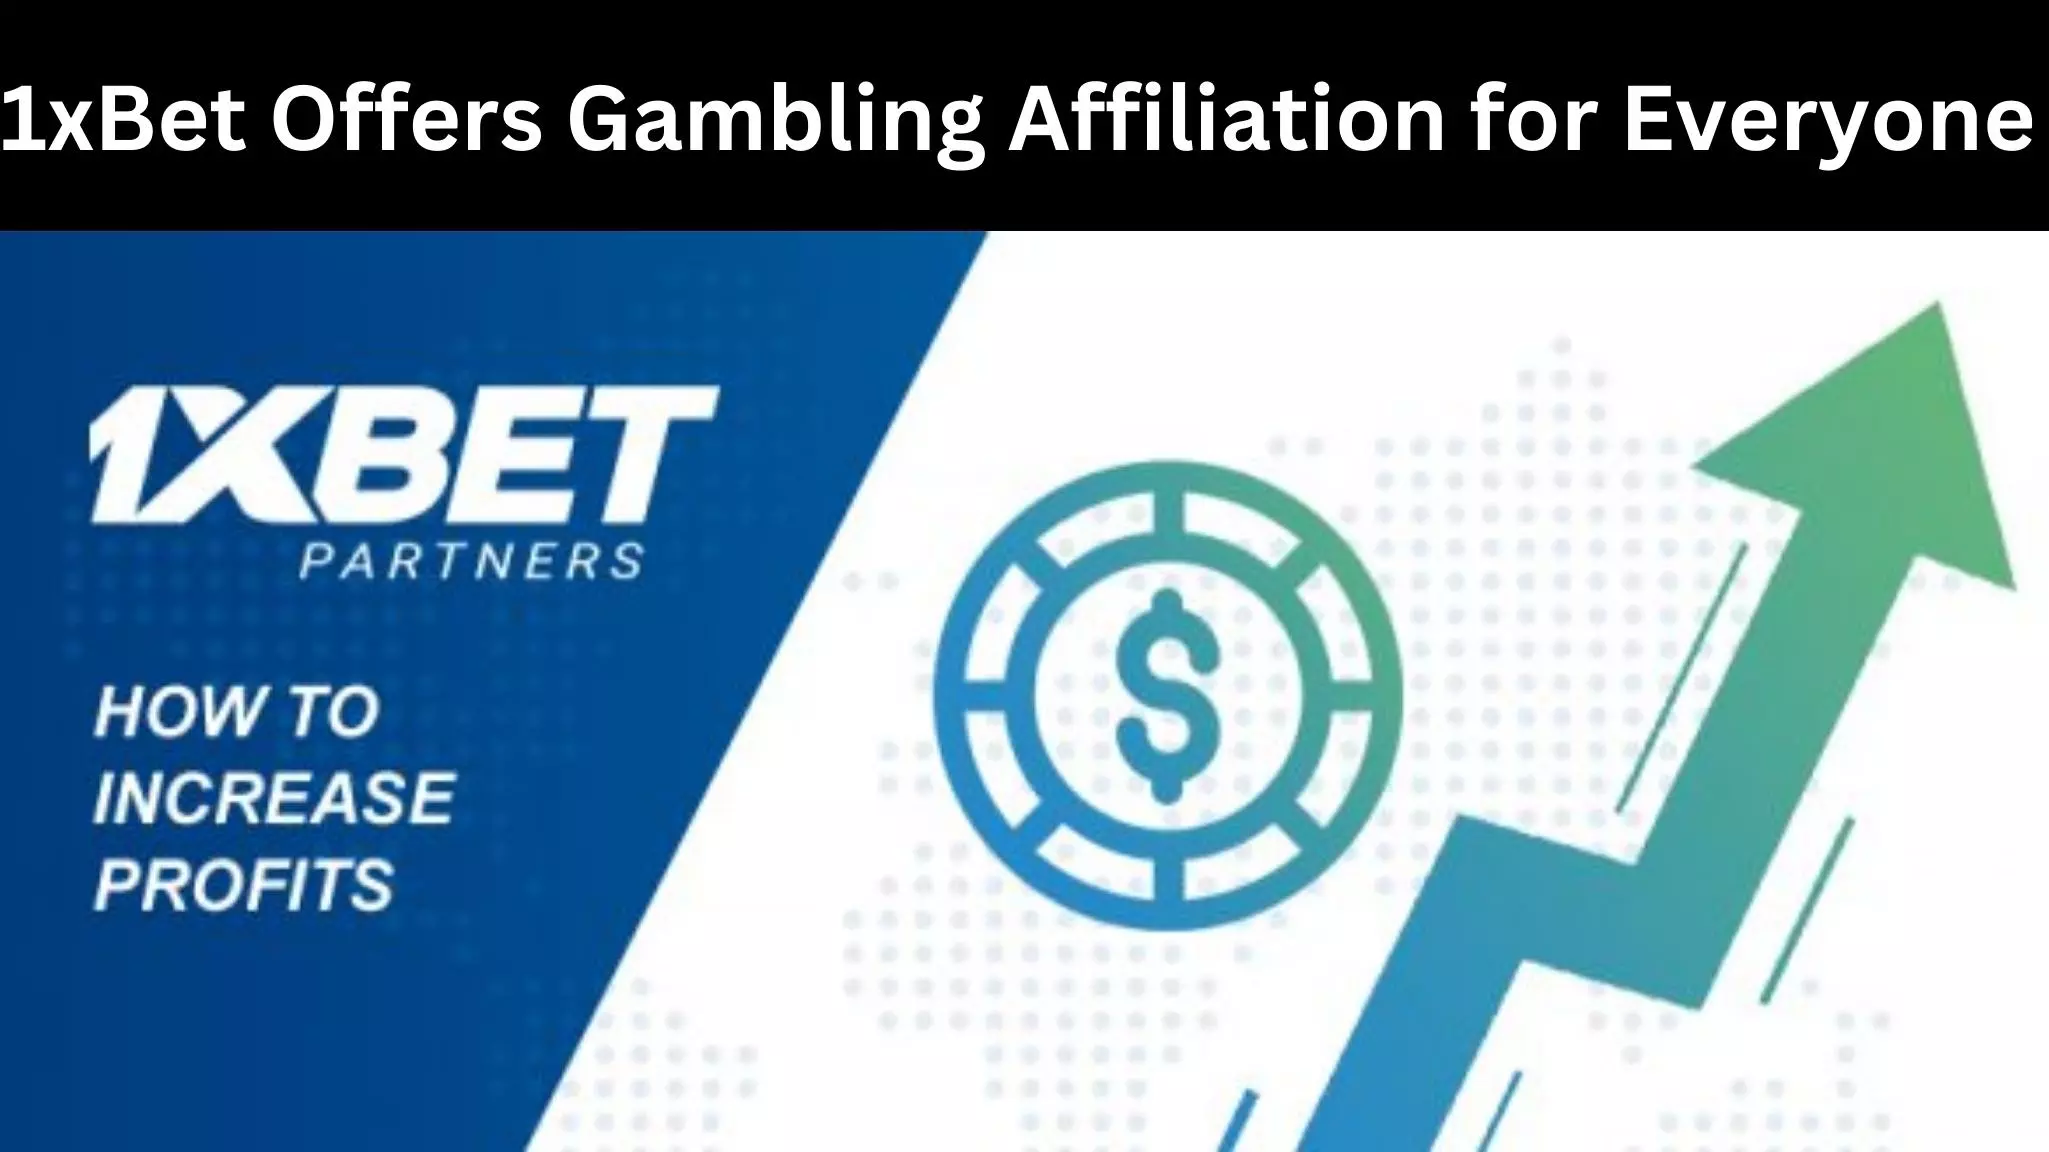 1xBet Offers Gambling Affiliation for Everyone